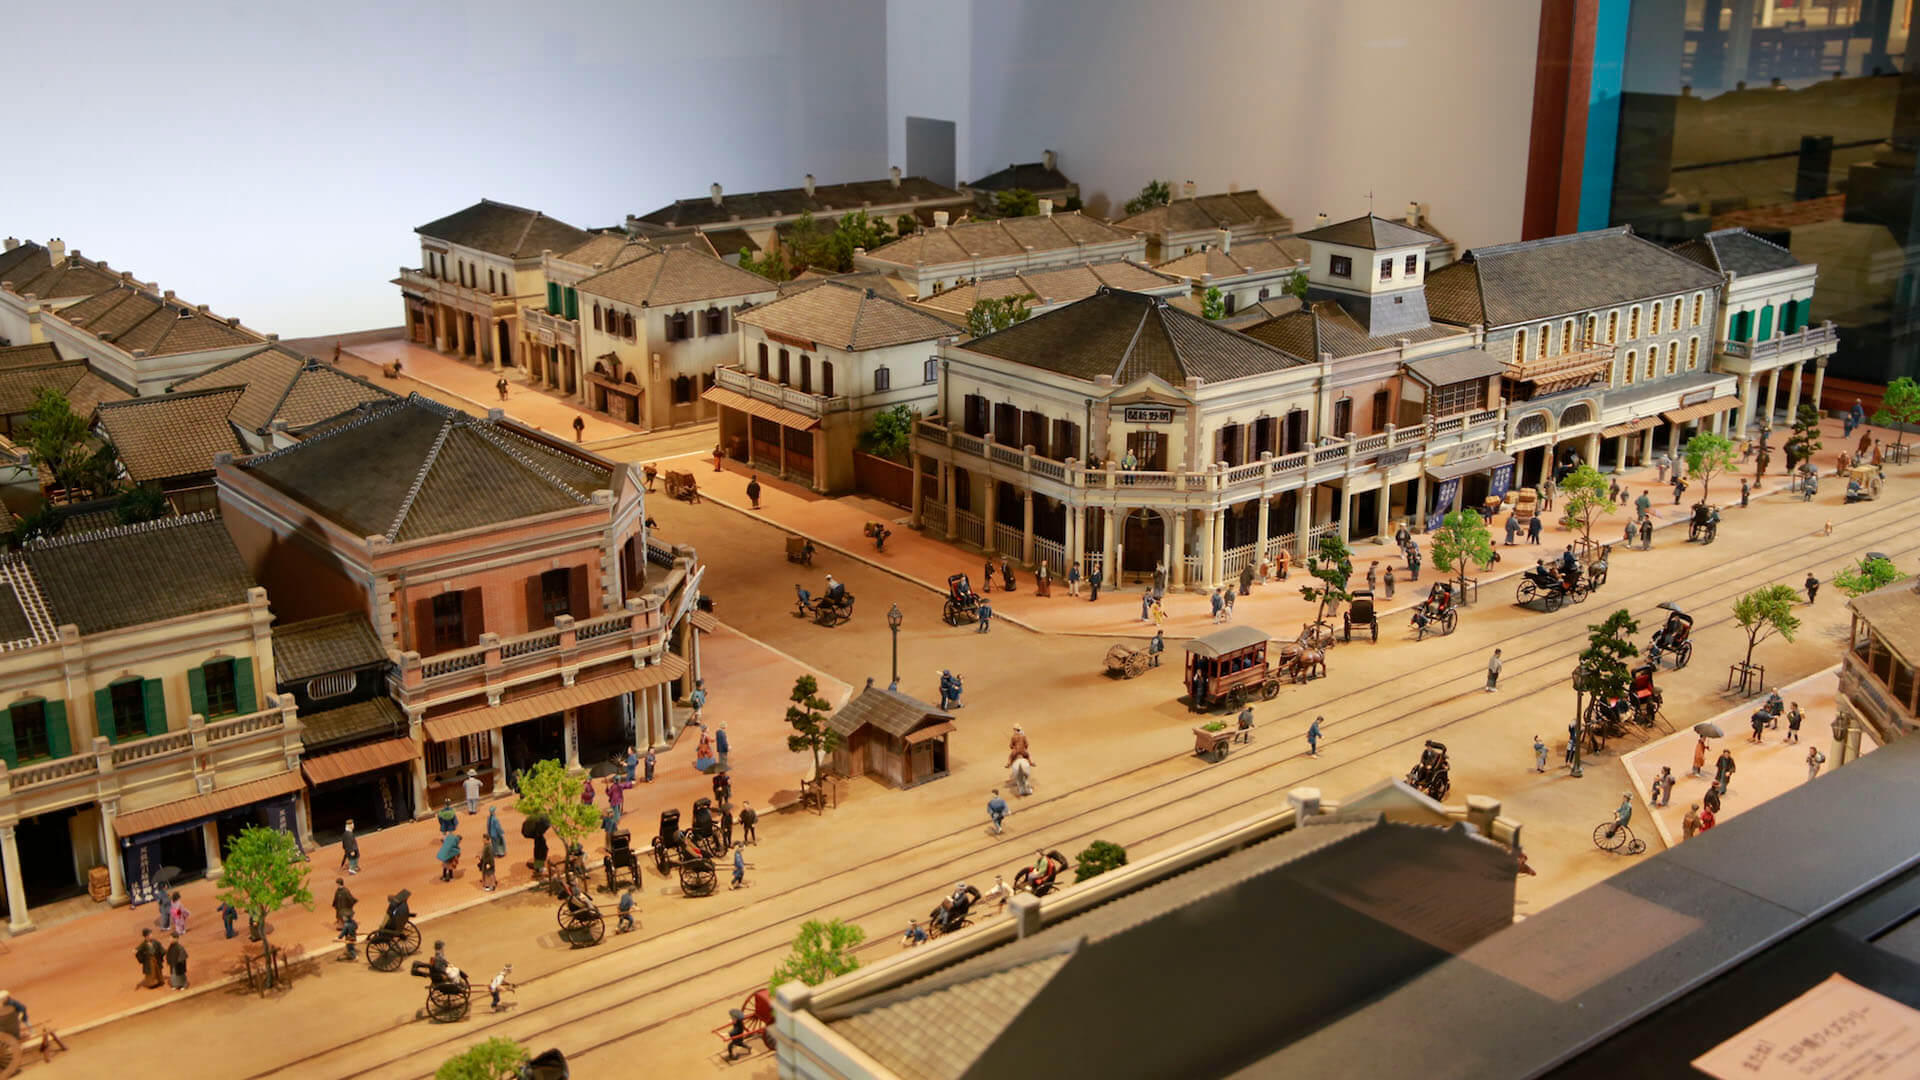 A model of Ginza Bricktown in the Edo-Tokyo Museum’s permanent exhibition